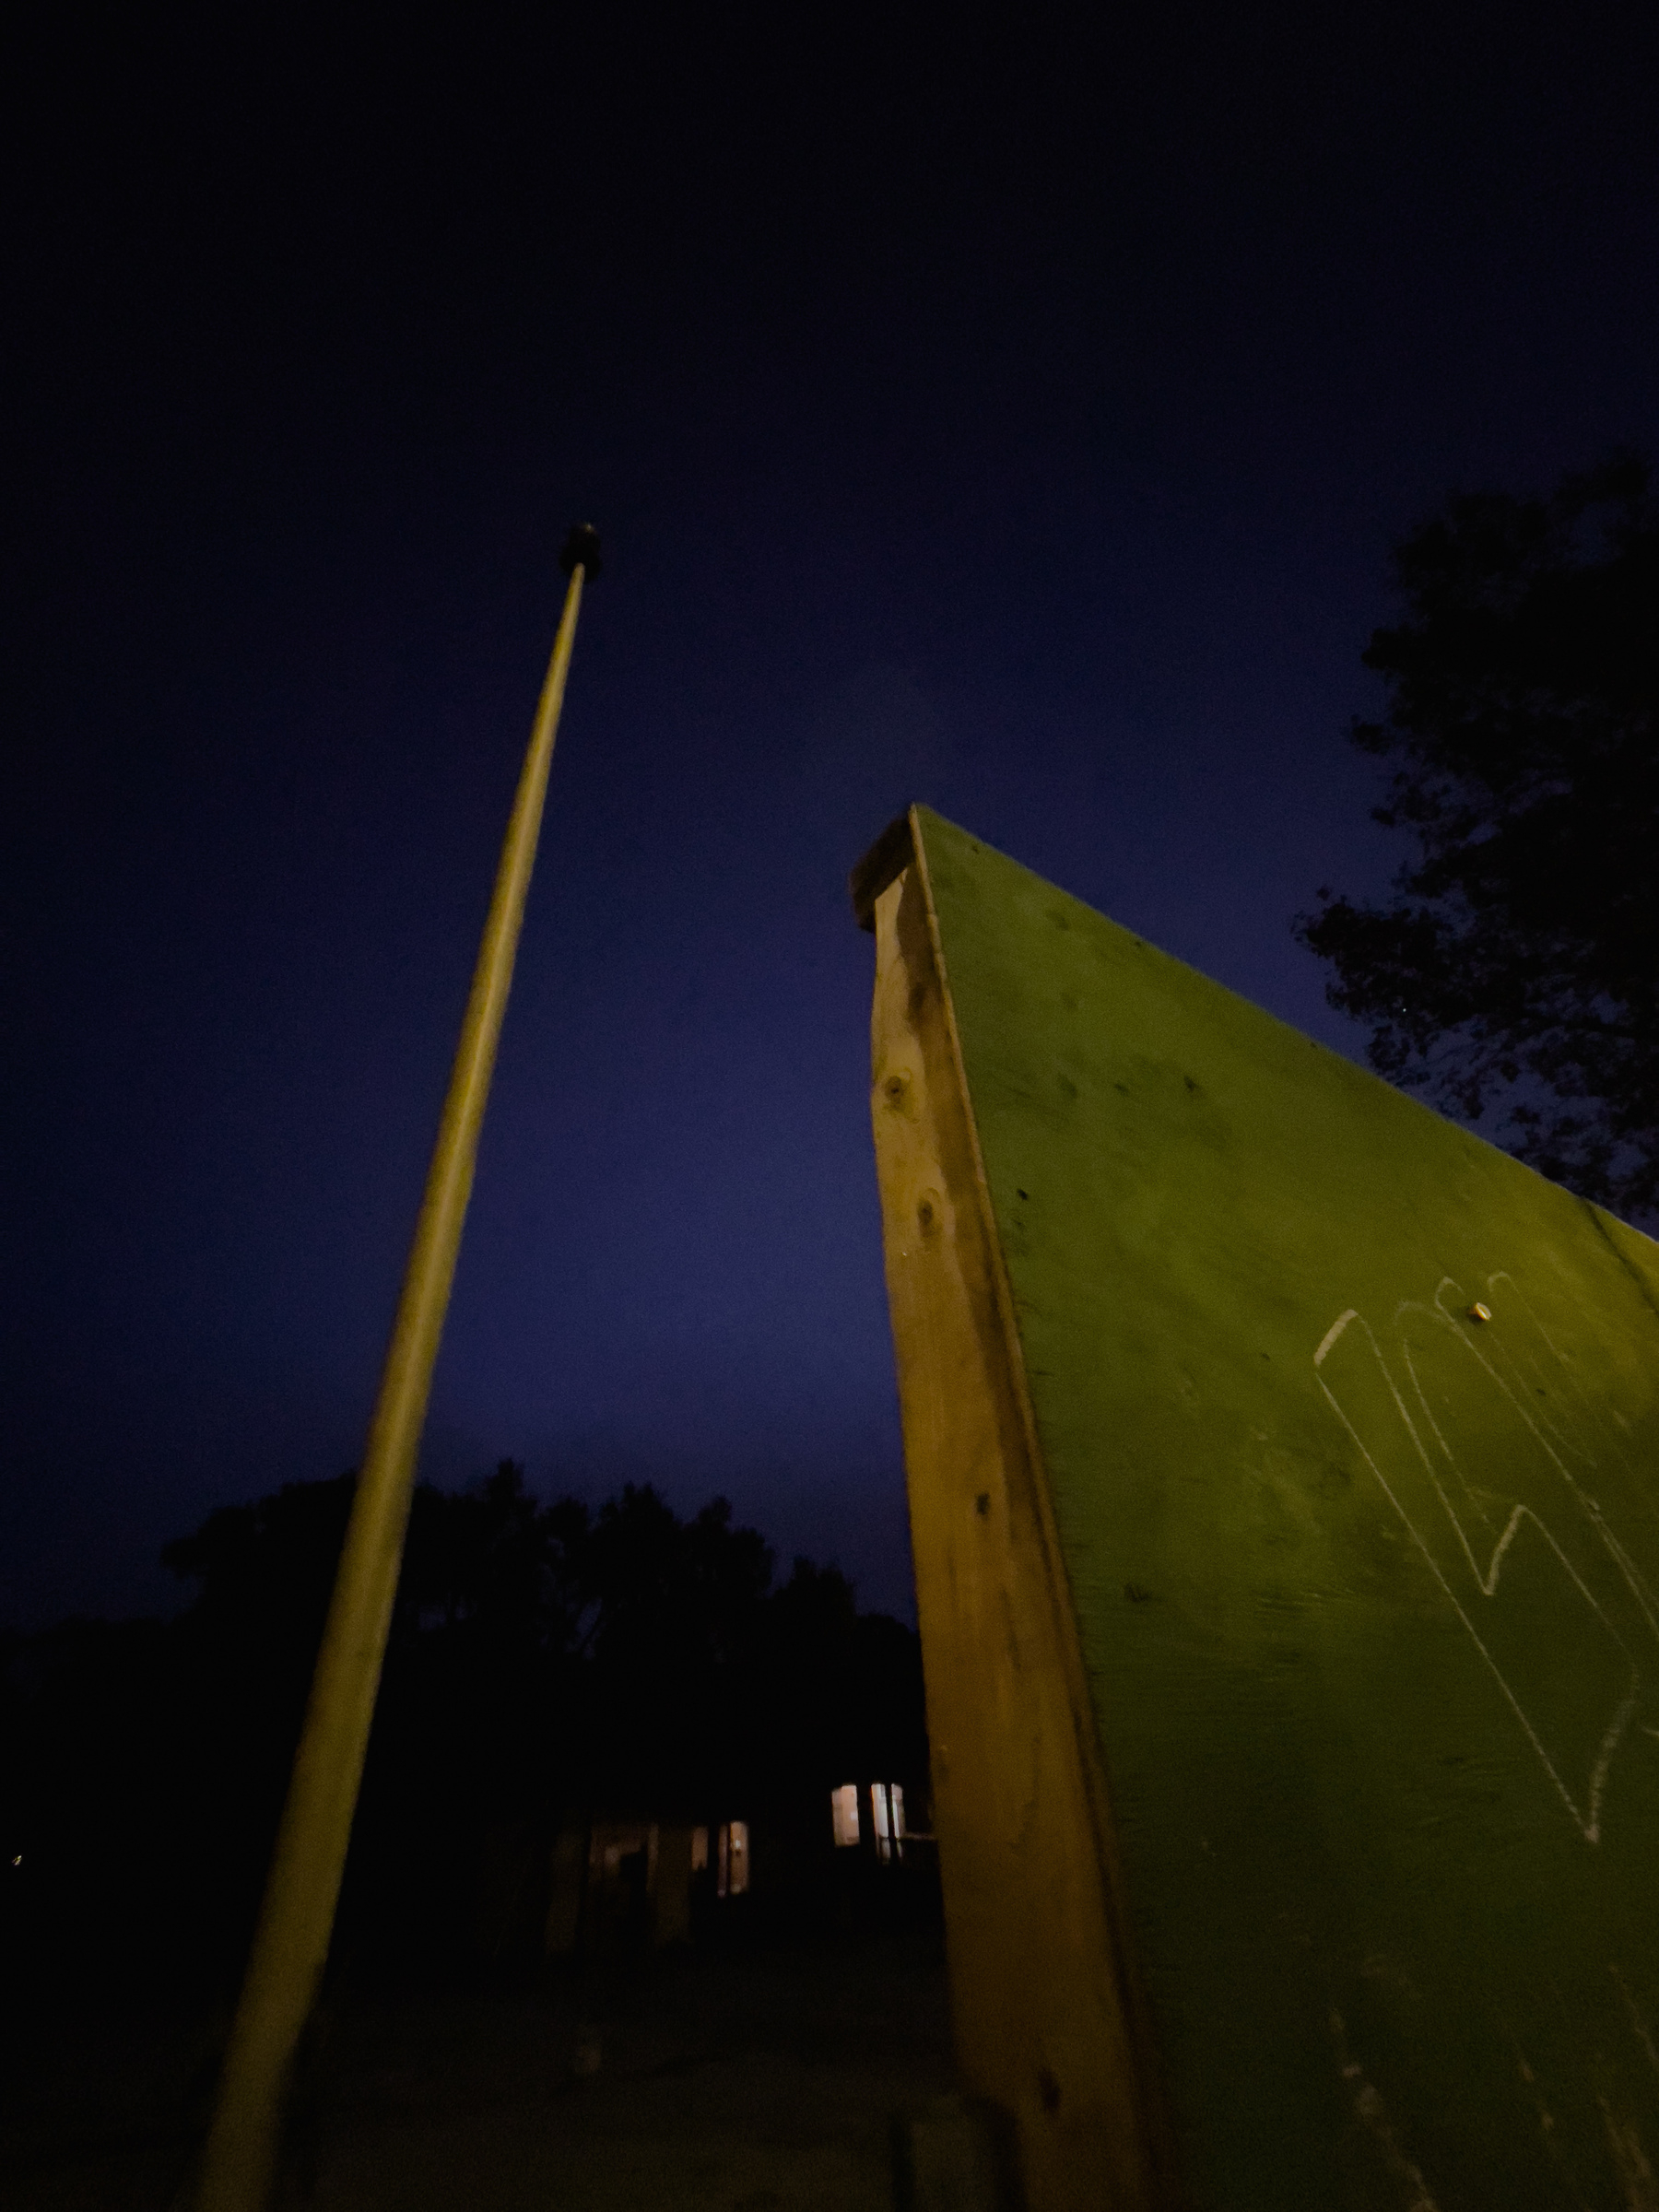 Flagpole and plywood construction fencing illuminated by streetlights.